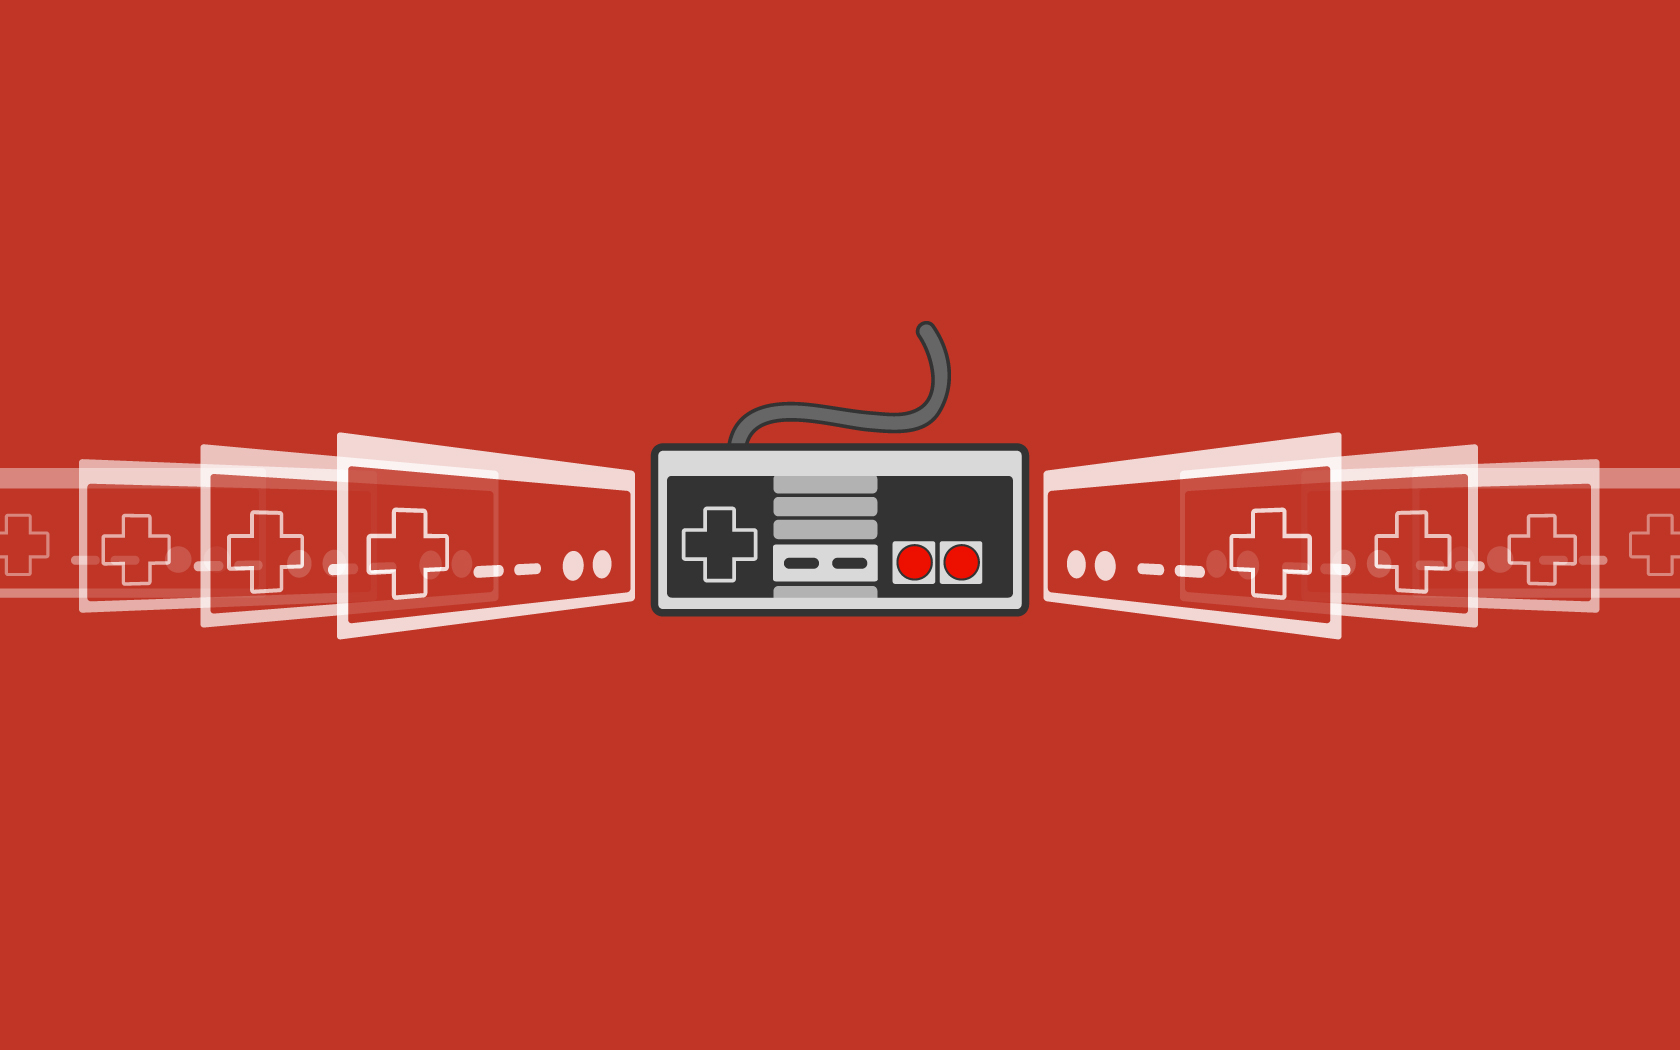 NES controller in red